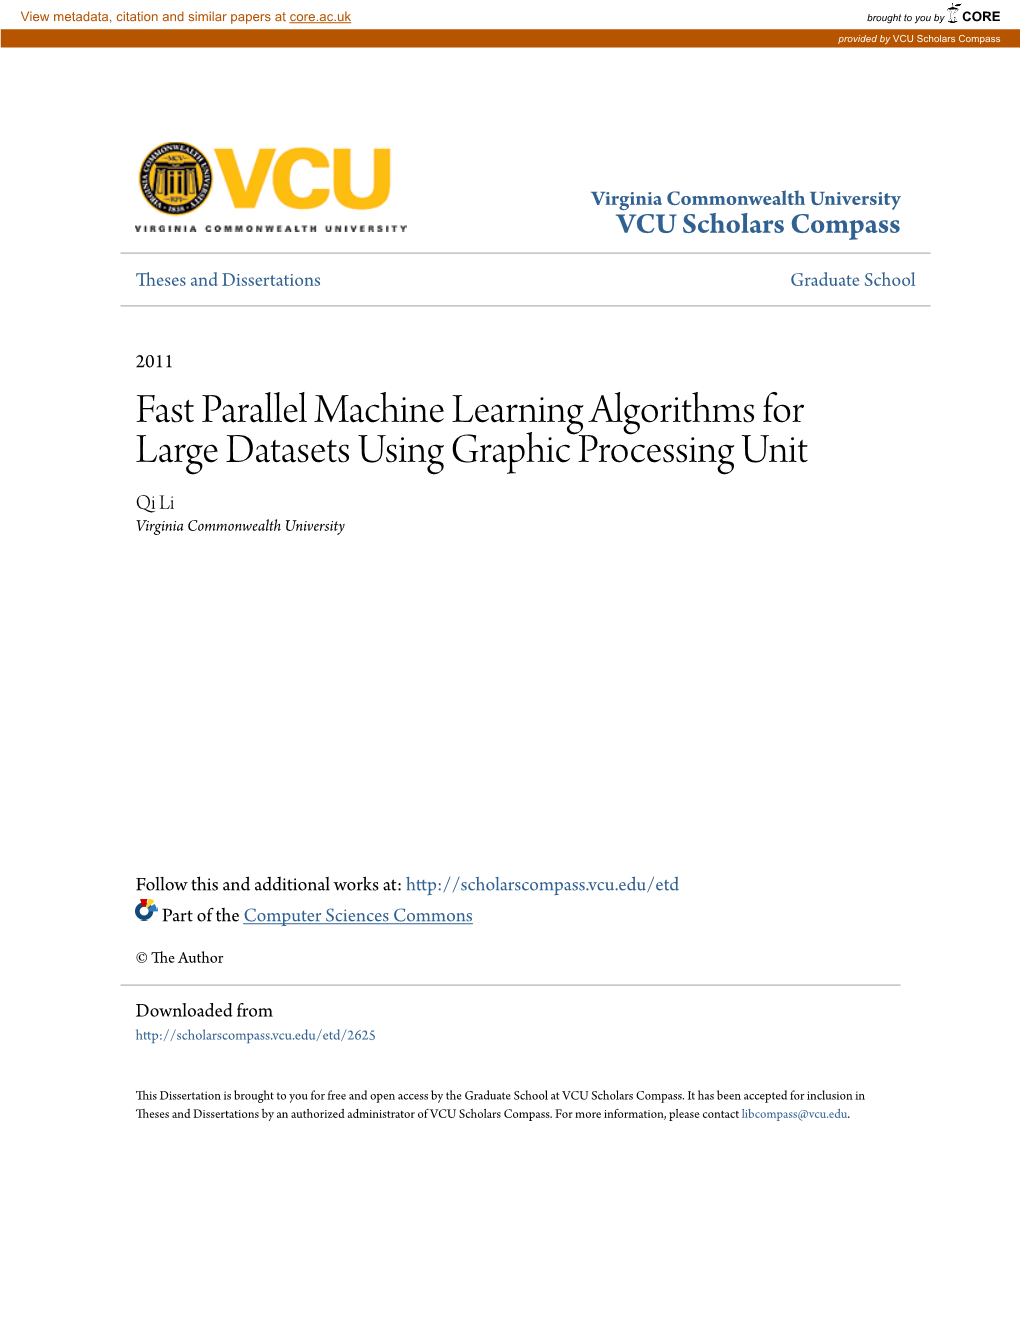 Fast Parallel Machine Learning Algorithms for Large Datasets Using Graphic Processing Unit Qi Li Virginia Commonwealth University